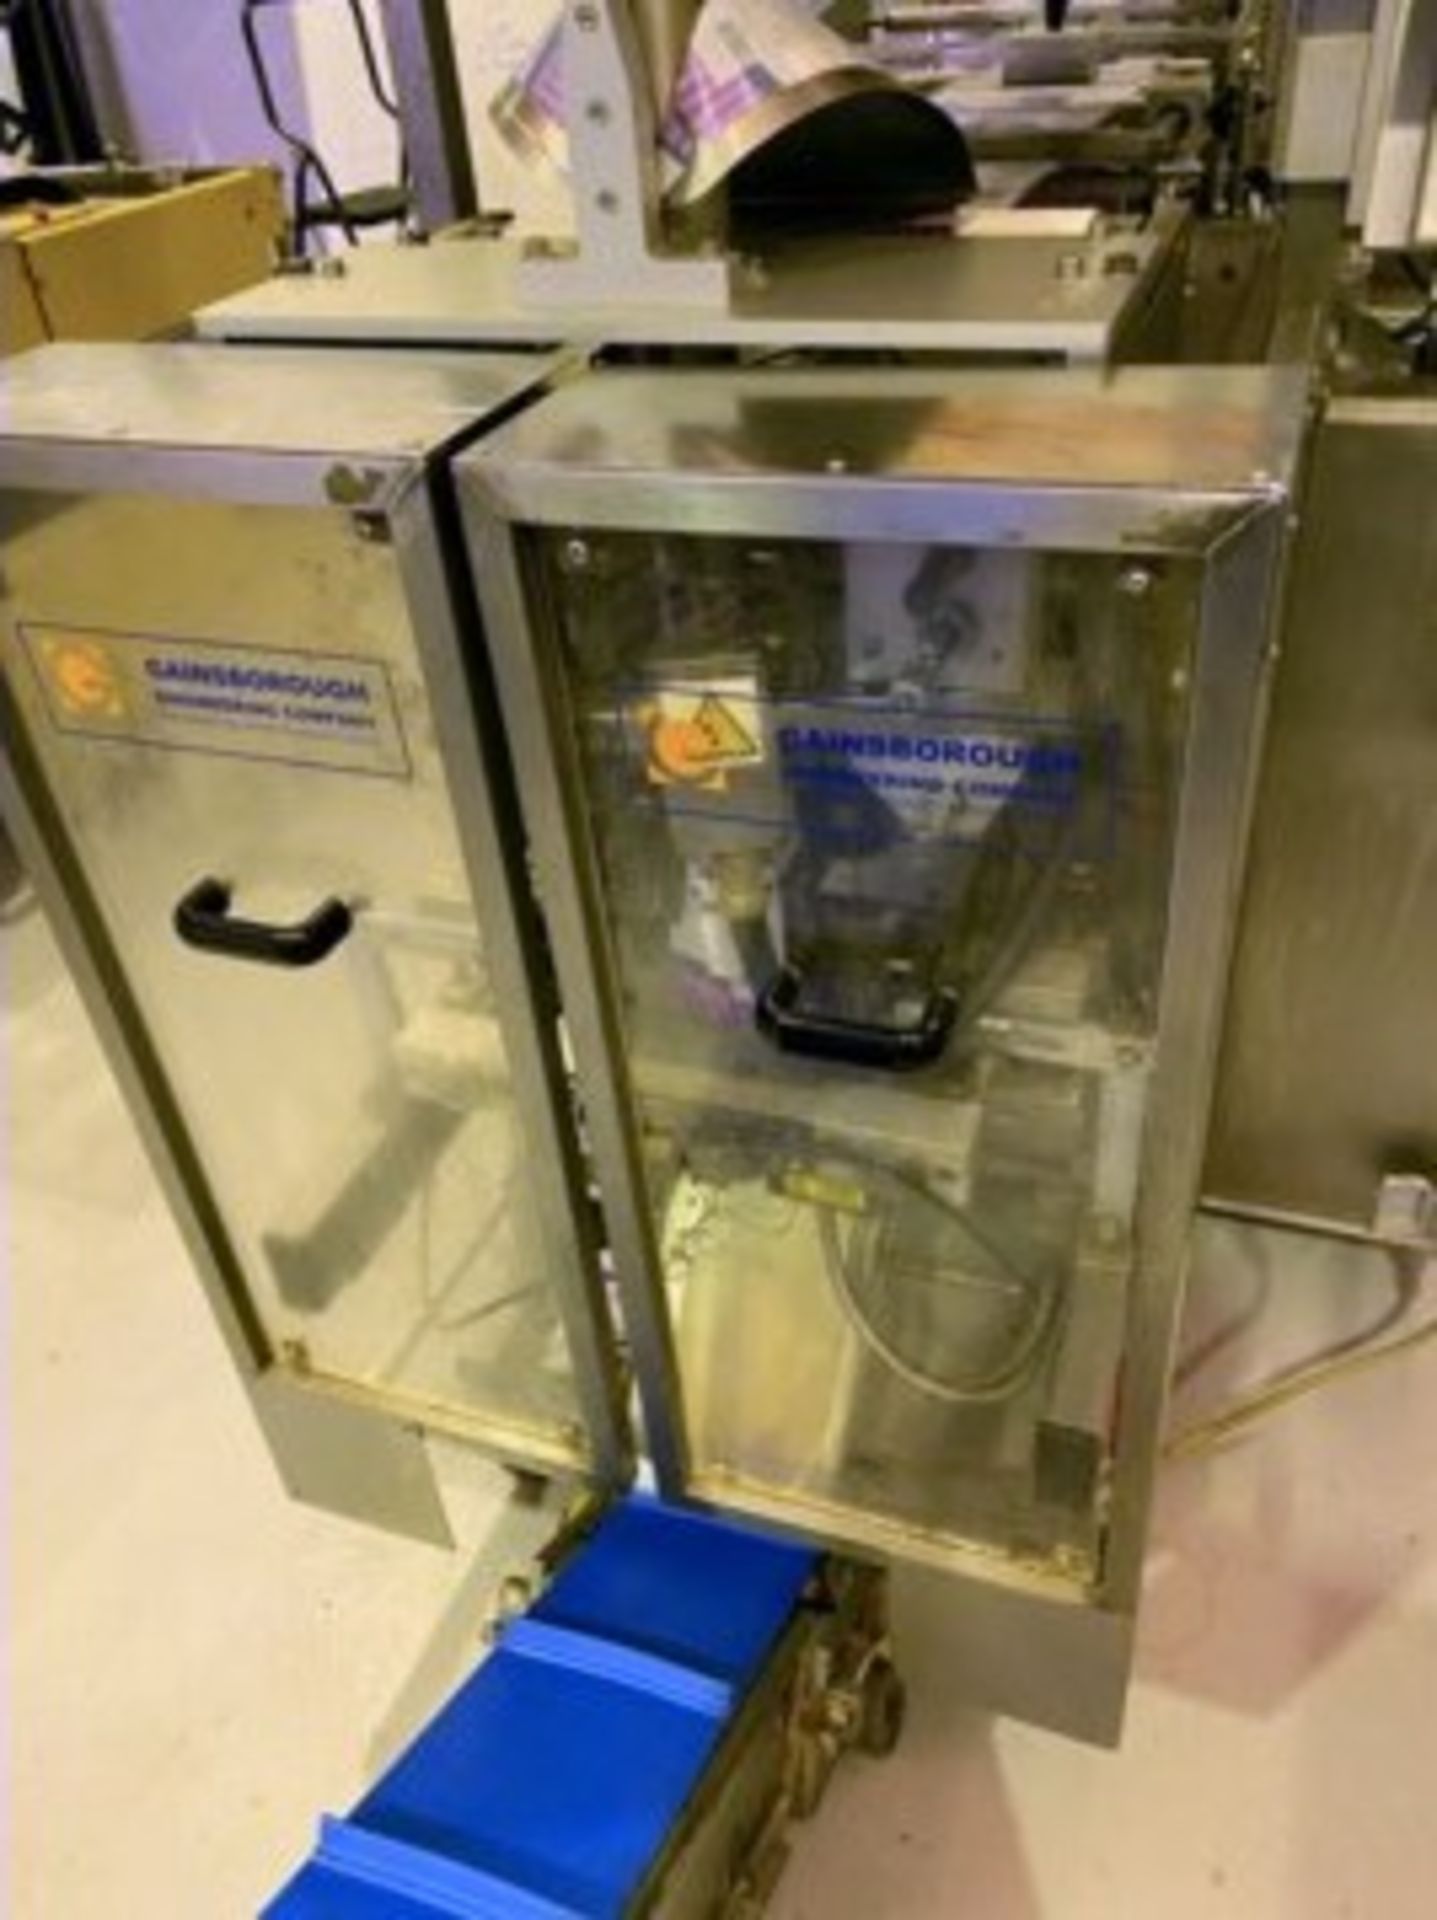 GAINSBOROUGH VERTICAL FORM FILL AND SEAL MACHINE. LO £100. - Image 12 of 16